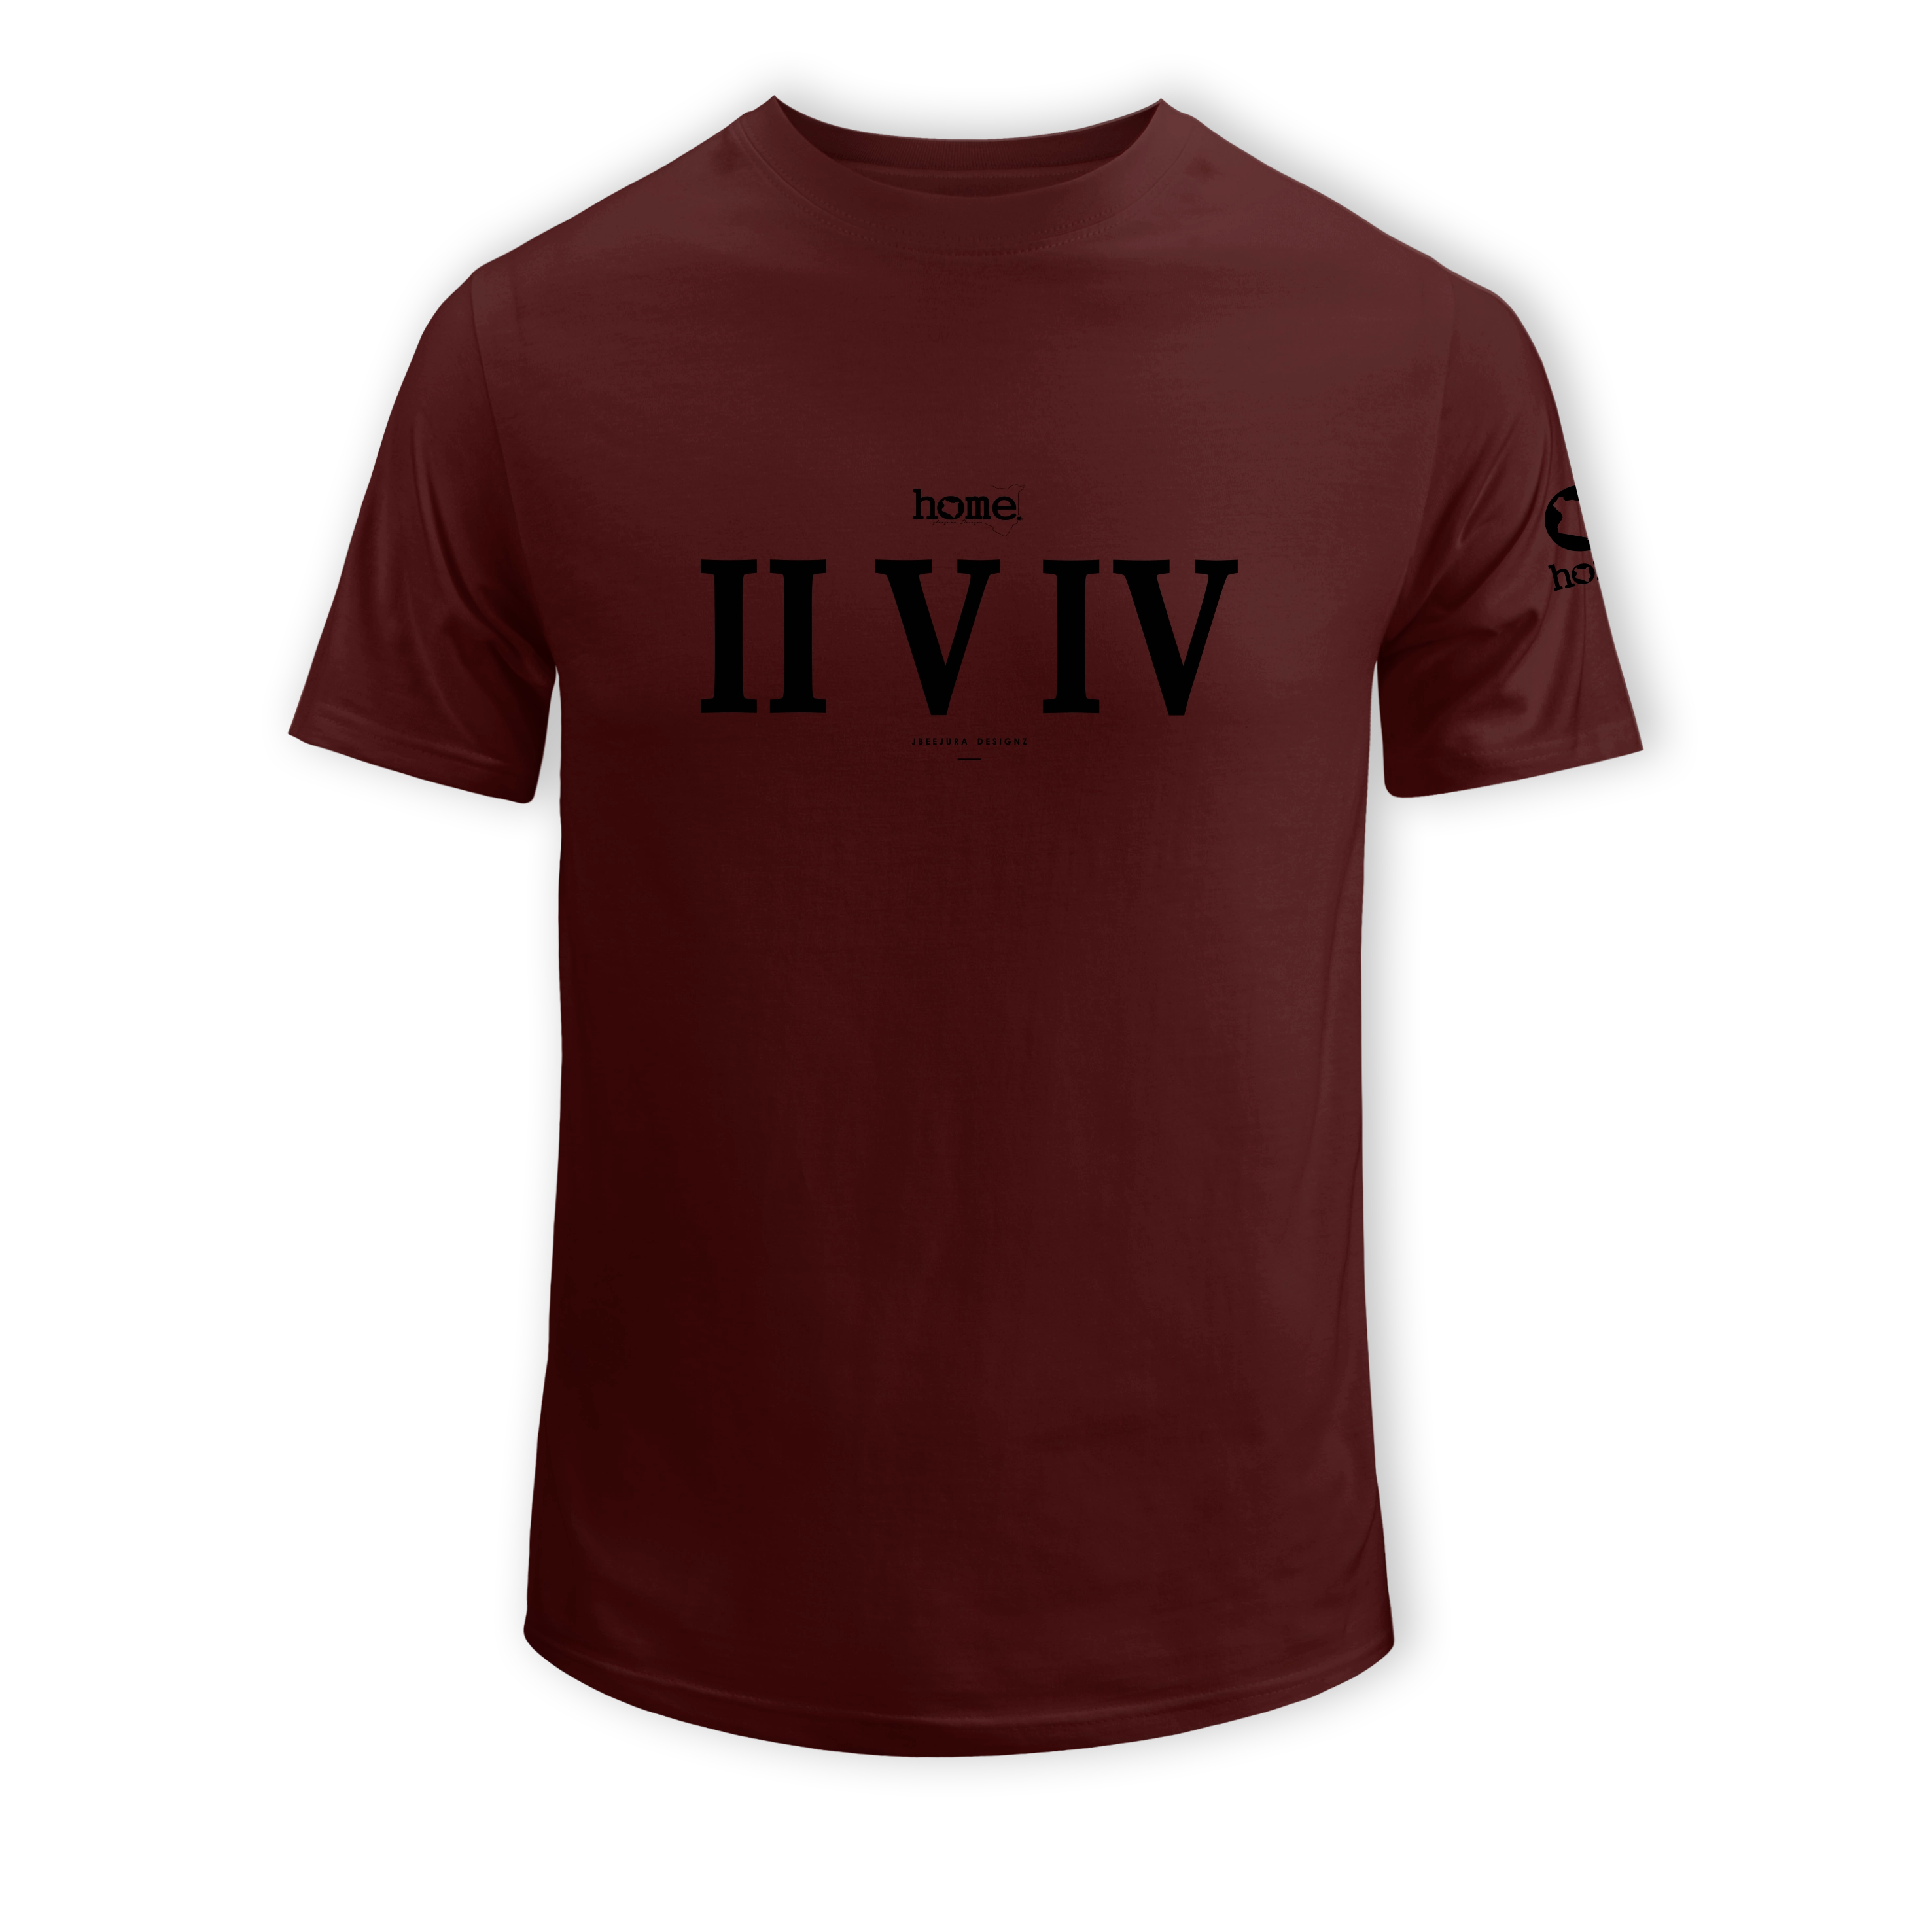 home_254 SHORT-SLEEVED MAROON T-SHIRT WITH A BLACK ROMAN NUMERALS PRINT – COTTON PLUS FABRIC